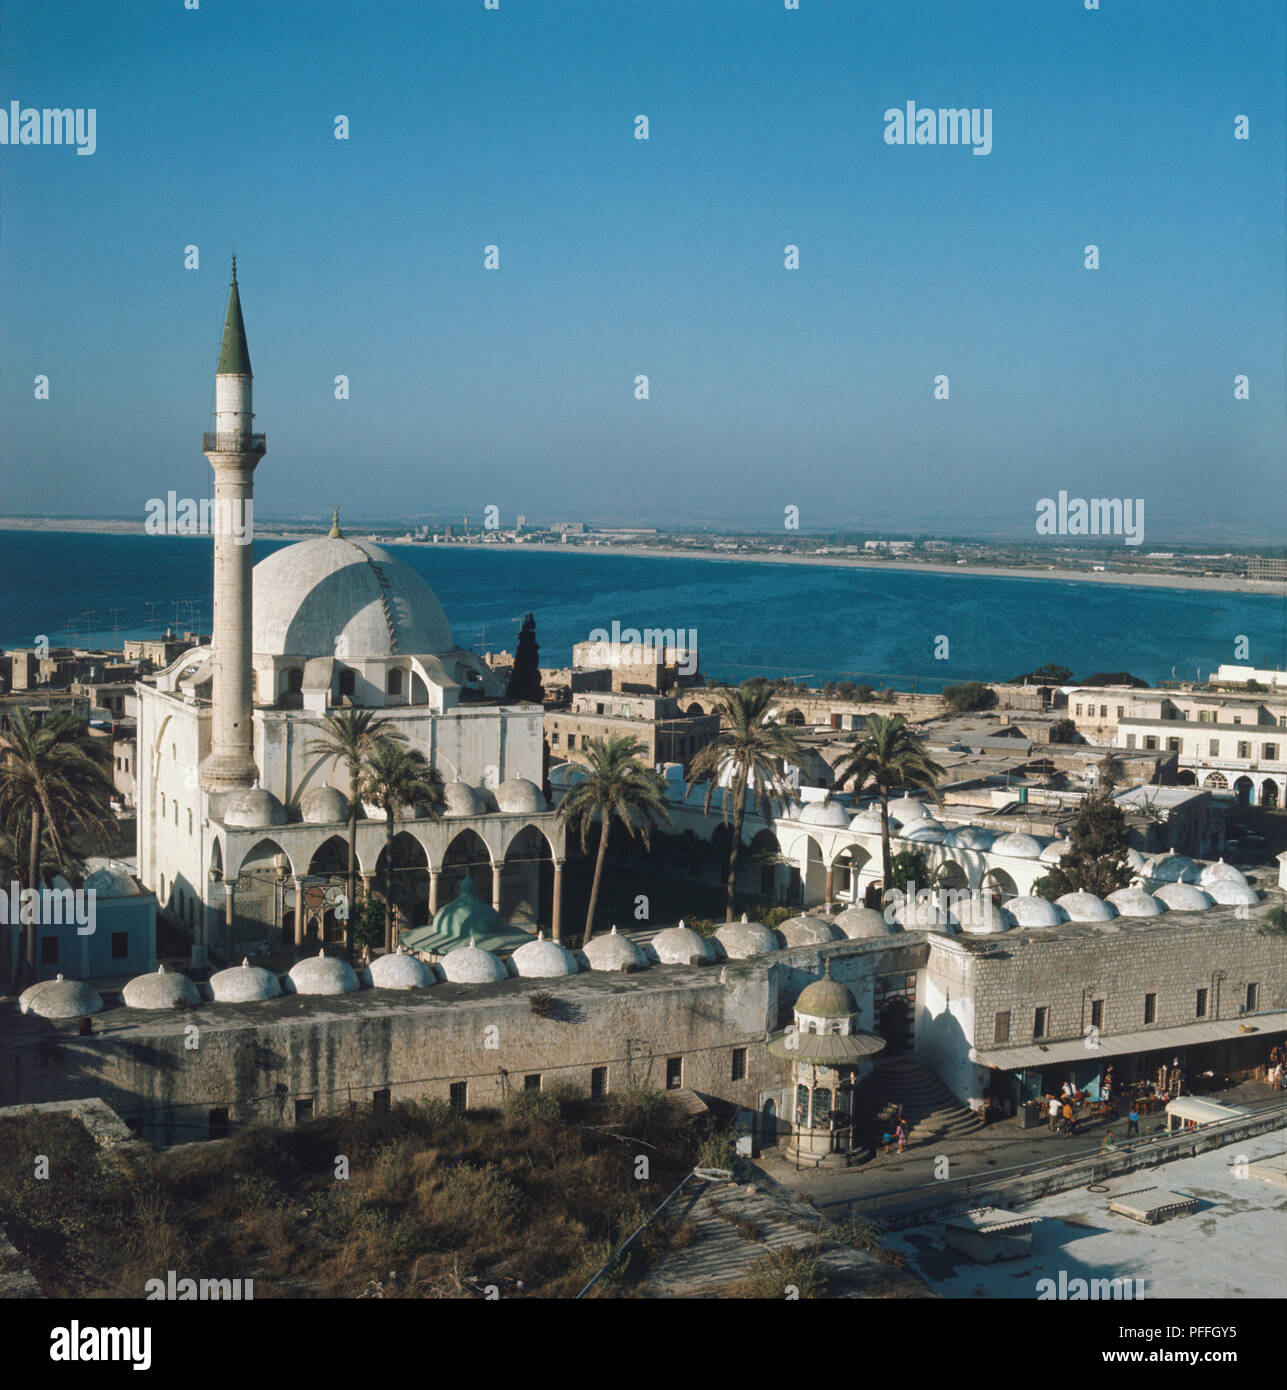 The Jazzar Pasha Mosque, minaret clearly visible, Acre, West Bank, Israel. Stock Photo